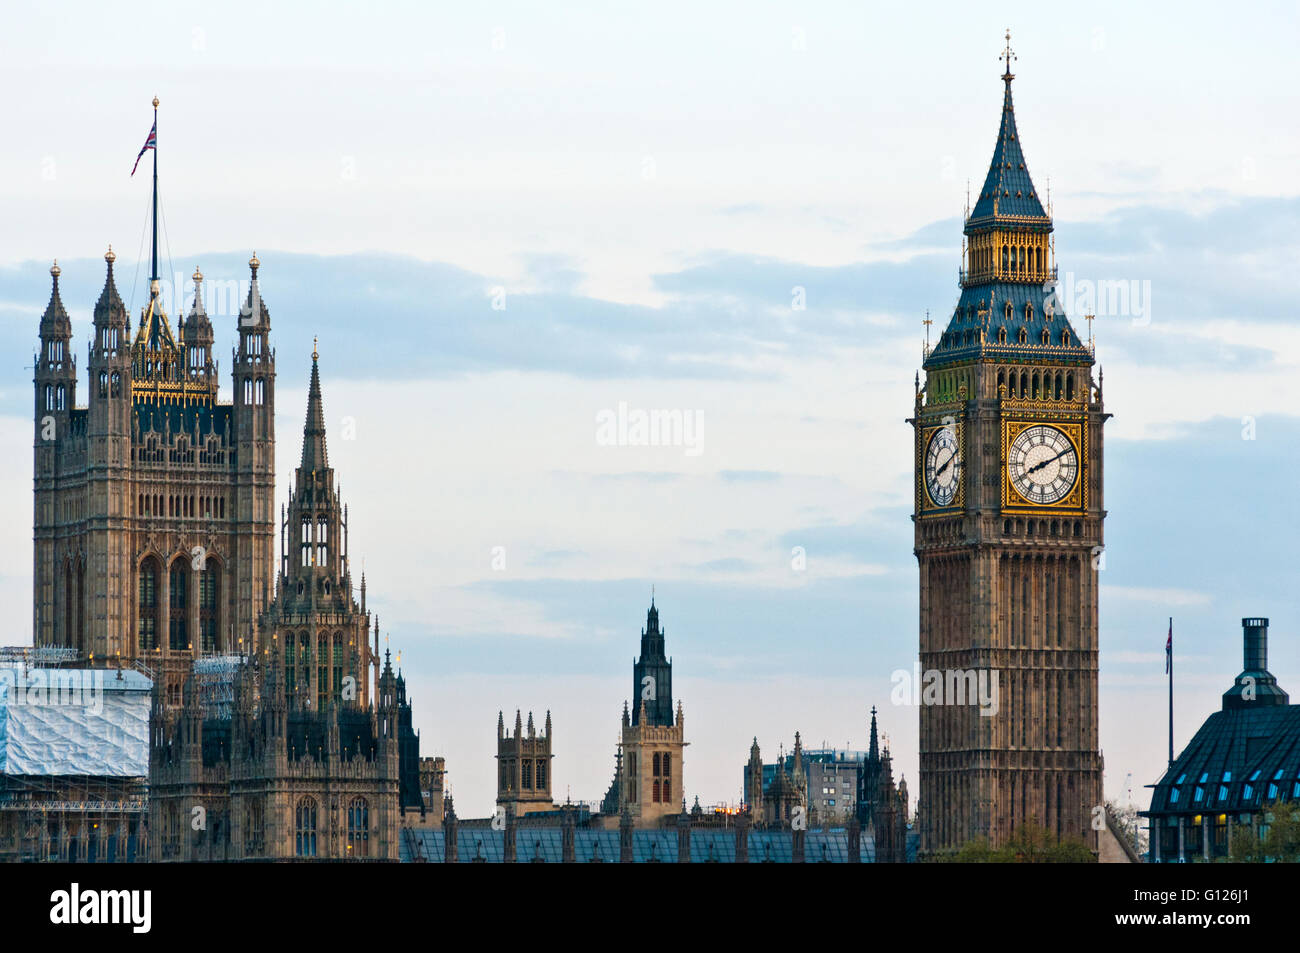 View towards Big Ben and the Houses of Parliament, London, England Stock Photo